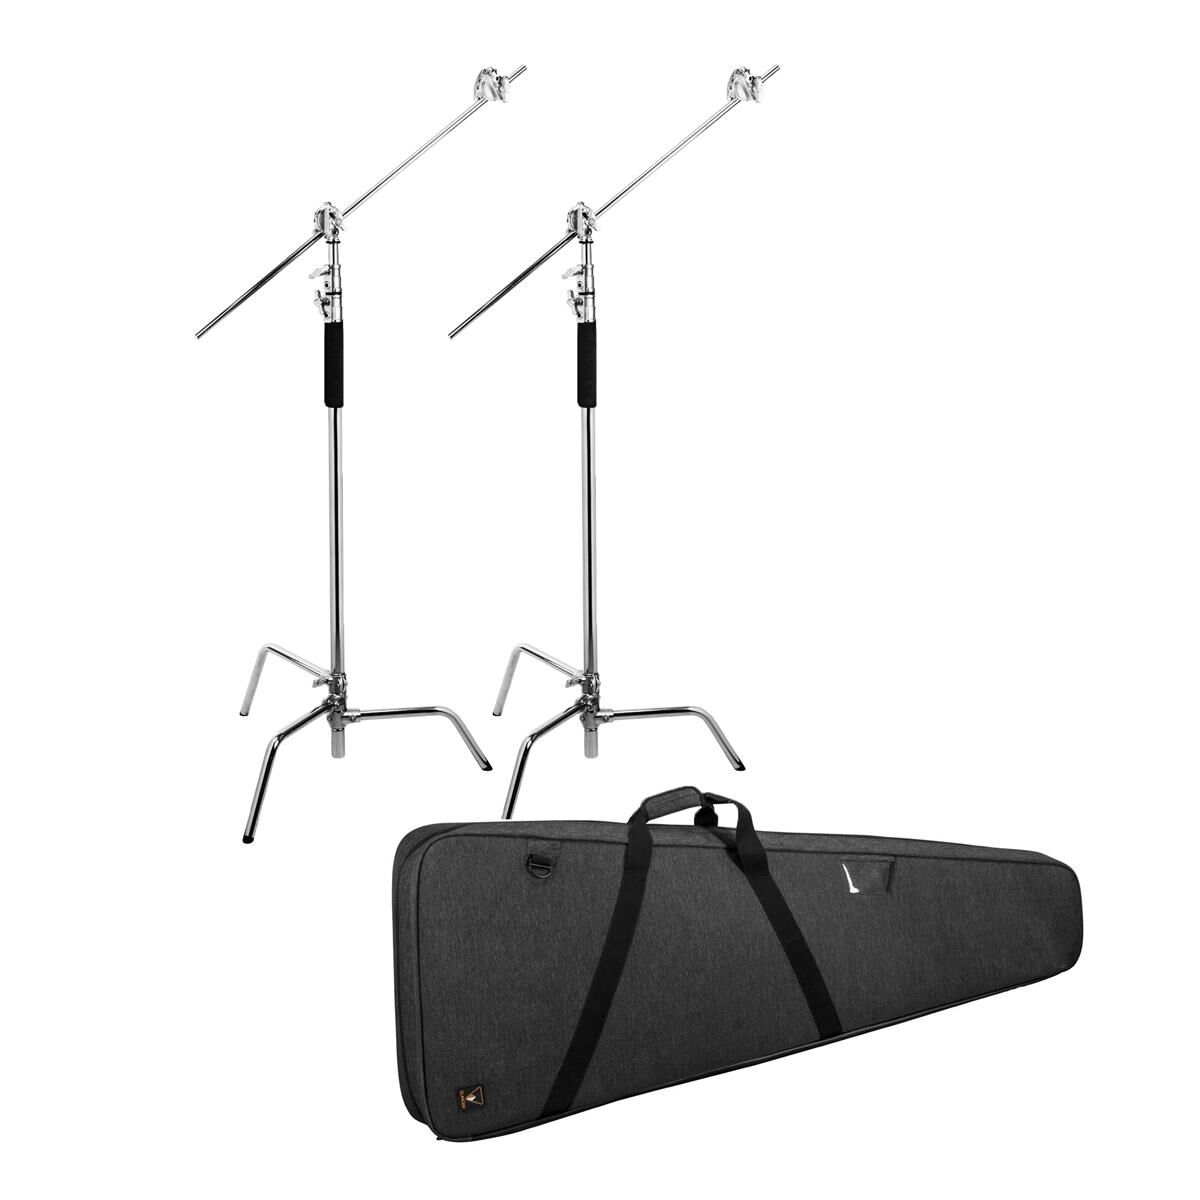 Flashpoint 10' Century Light Stand on Turtle Base Kit, 2-Pack with Case